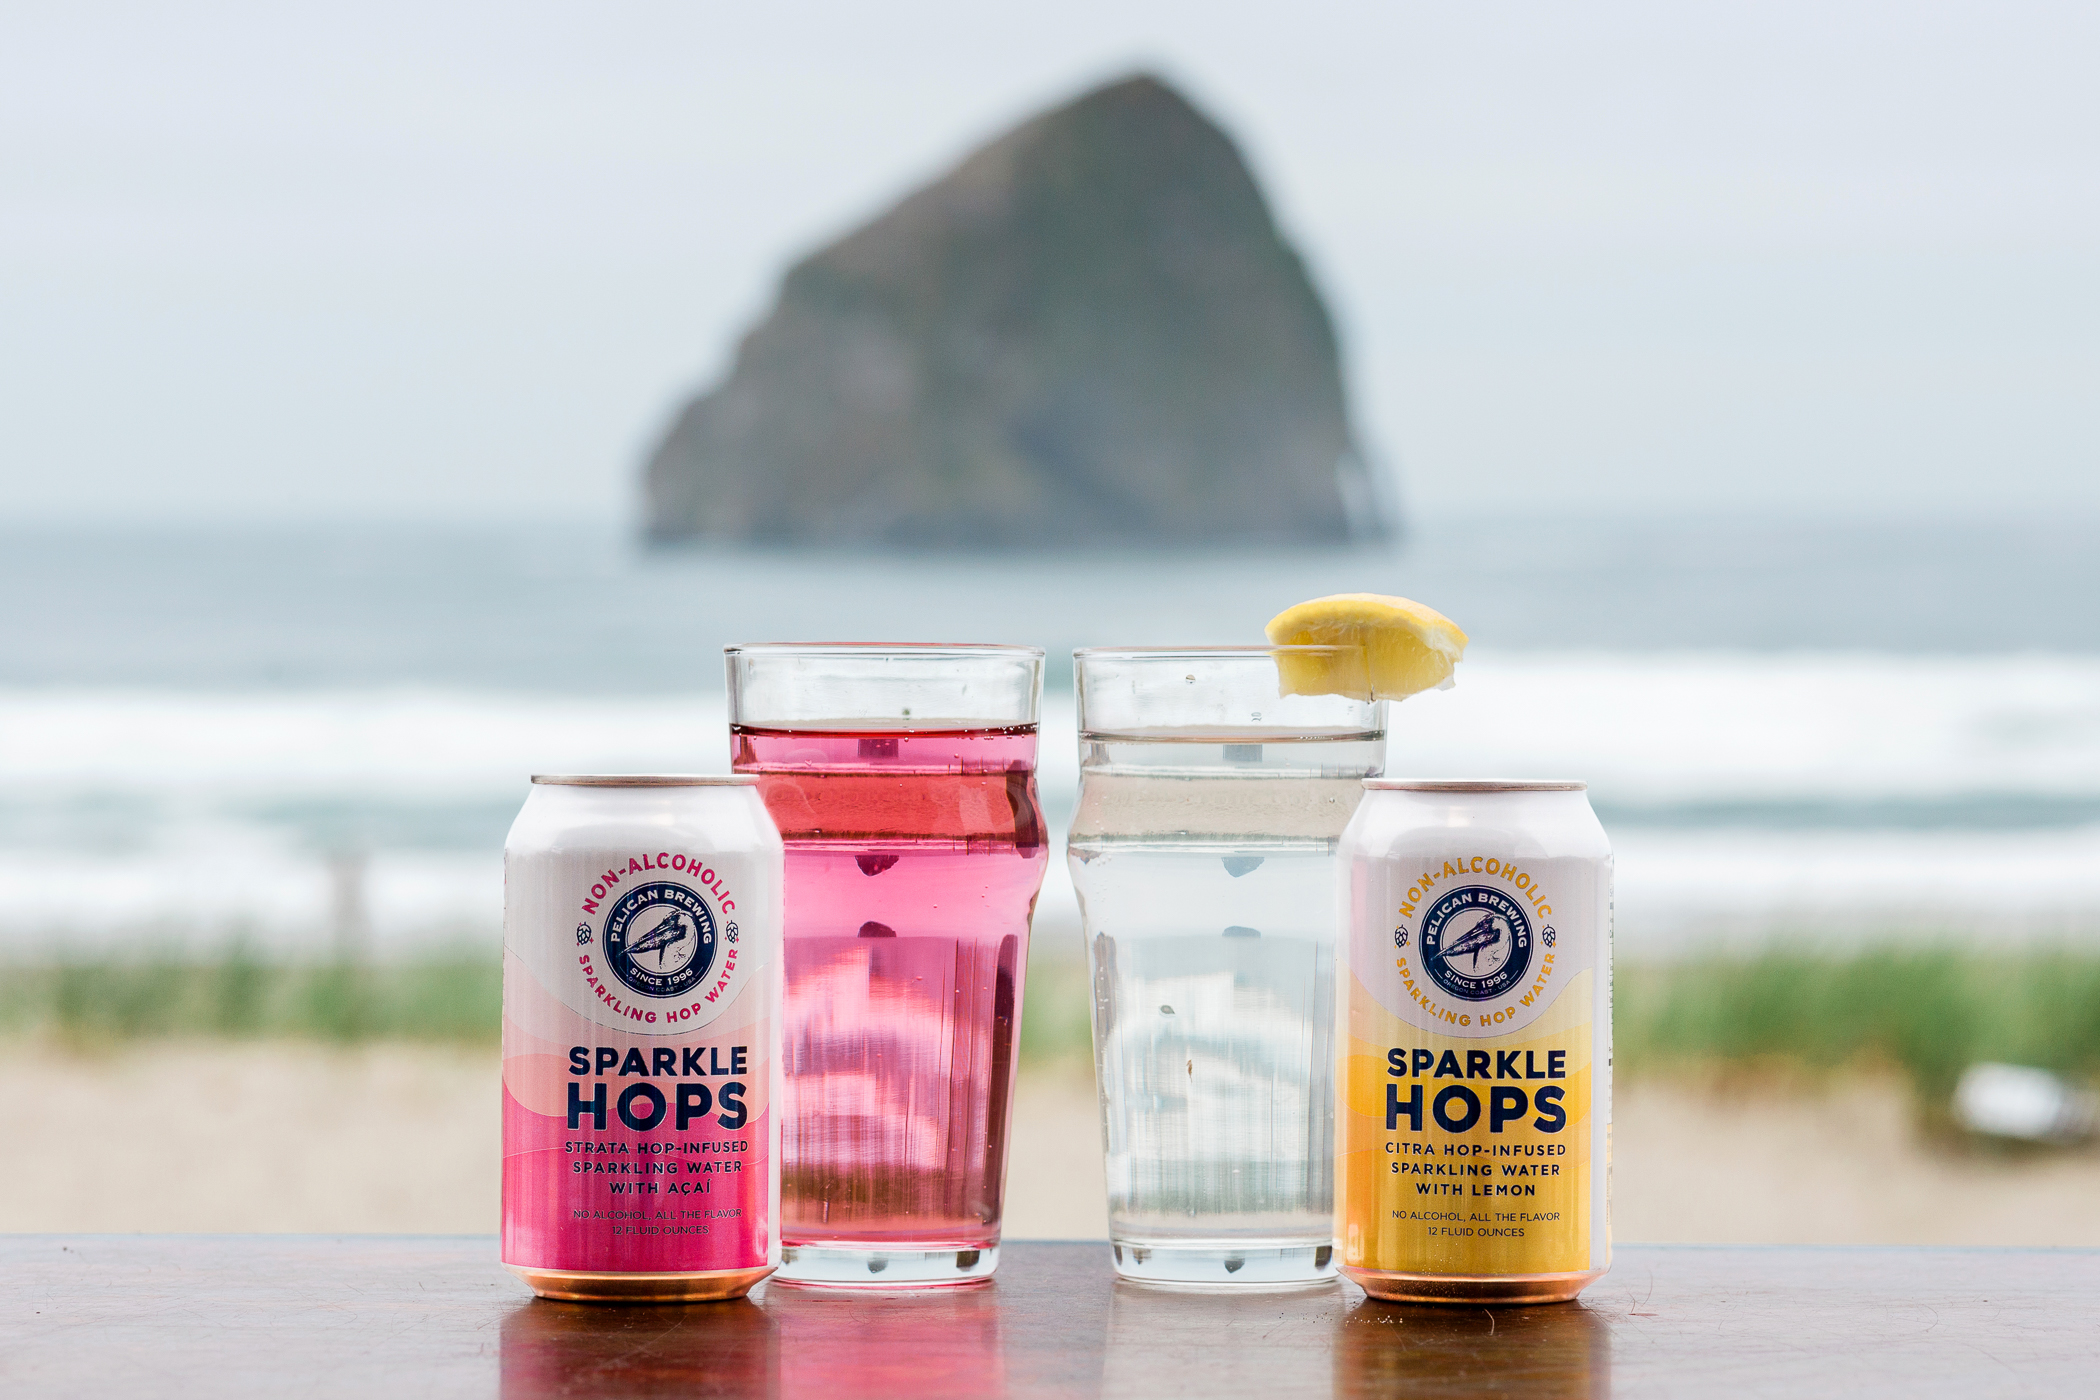 image of Sparkle Hops - Non Alcoholic Sparkling Hop Water courtesy of Pelican Brewing Company